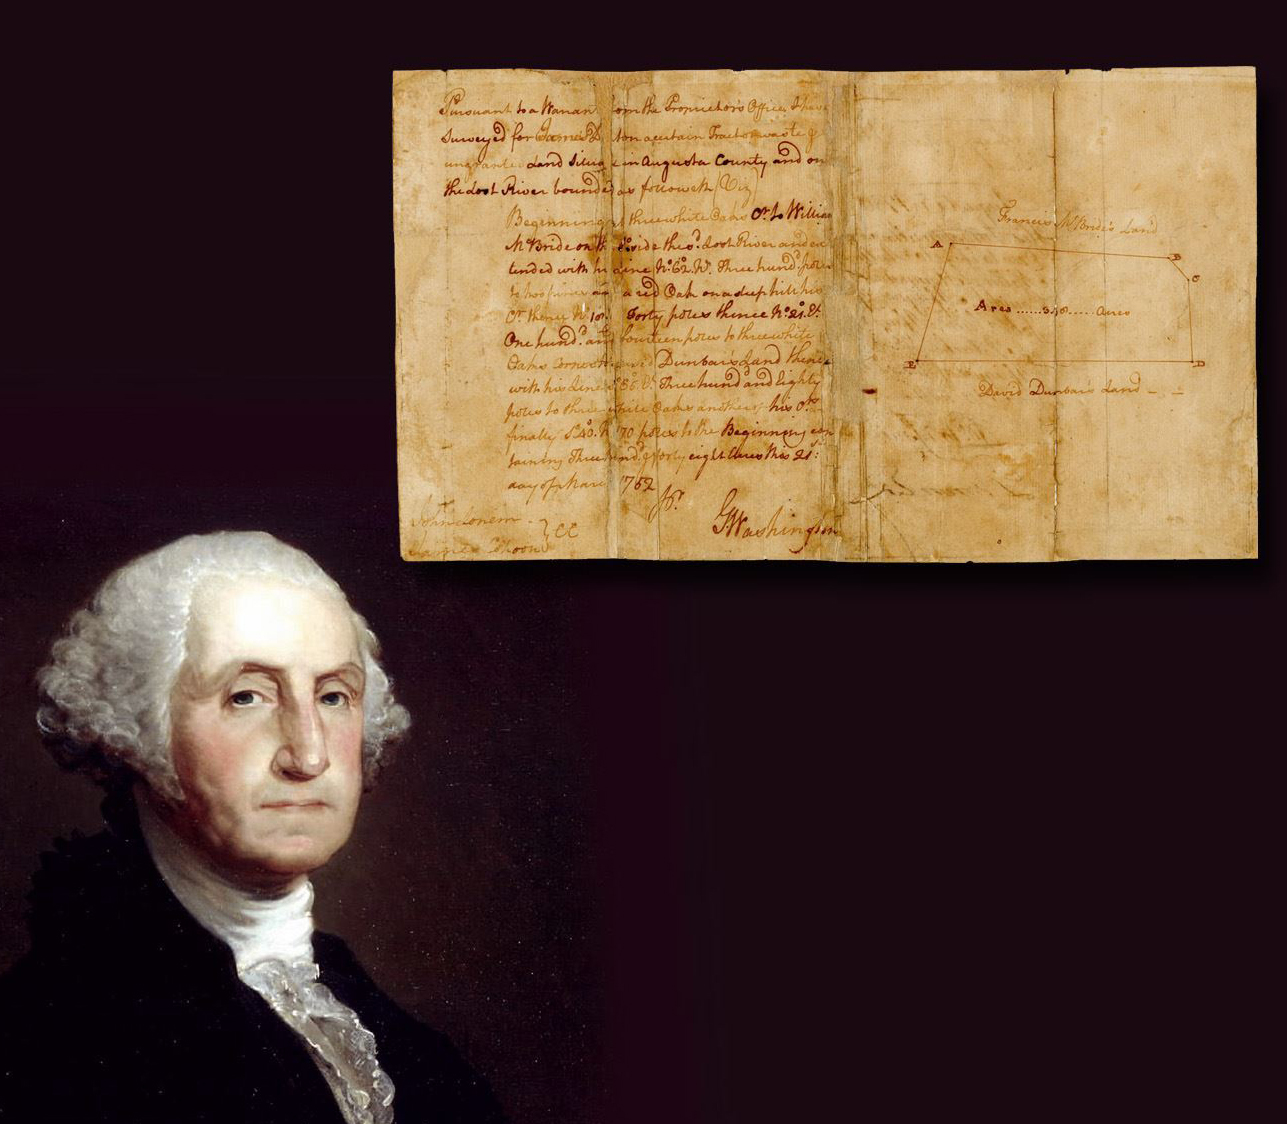 George Washington-signed 1752 survey of a 346-acre tract in Augusta County, Virginia, one of the earliest documents with his signature, est. $20,000-$24,000